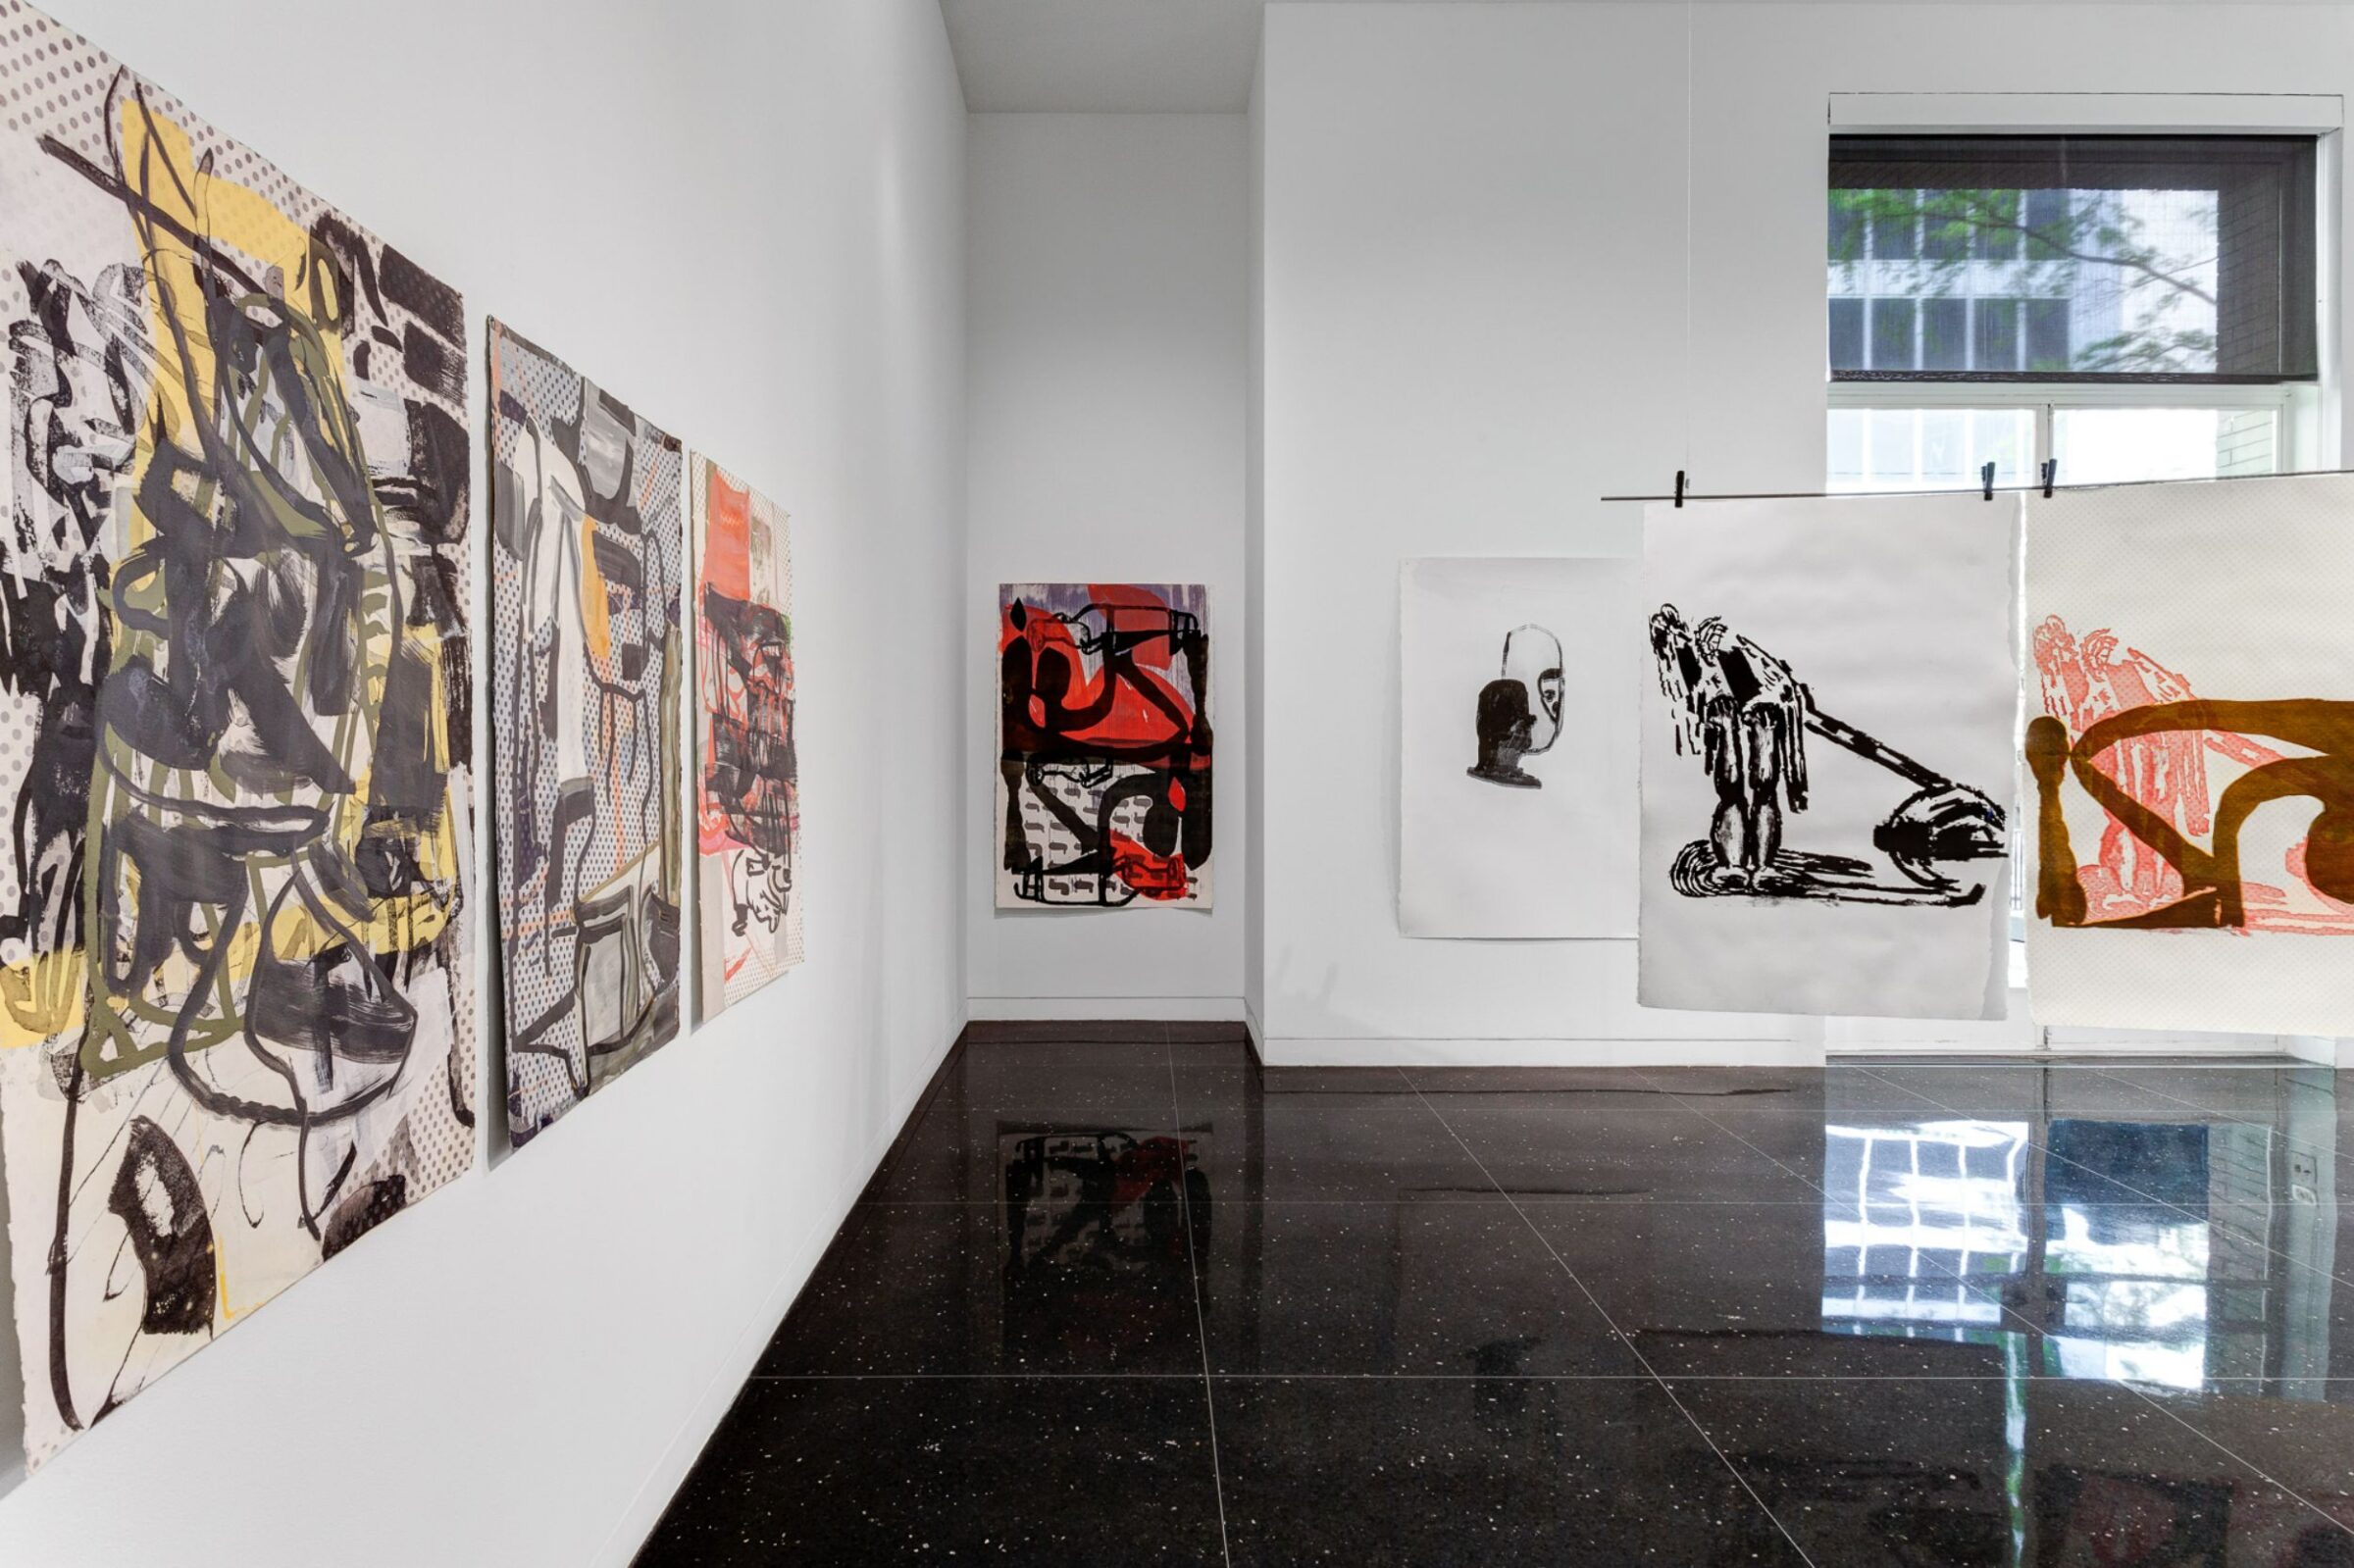 Installation view of the Arts Club's west gallery. In one corner hangs an abstract black and red painting. A drawing hangs suspended from a clothesline to the right.